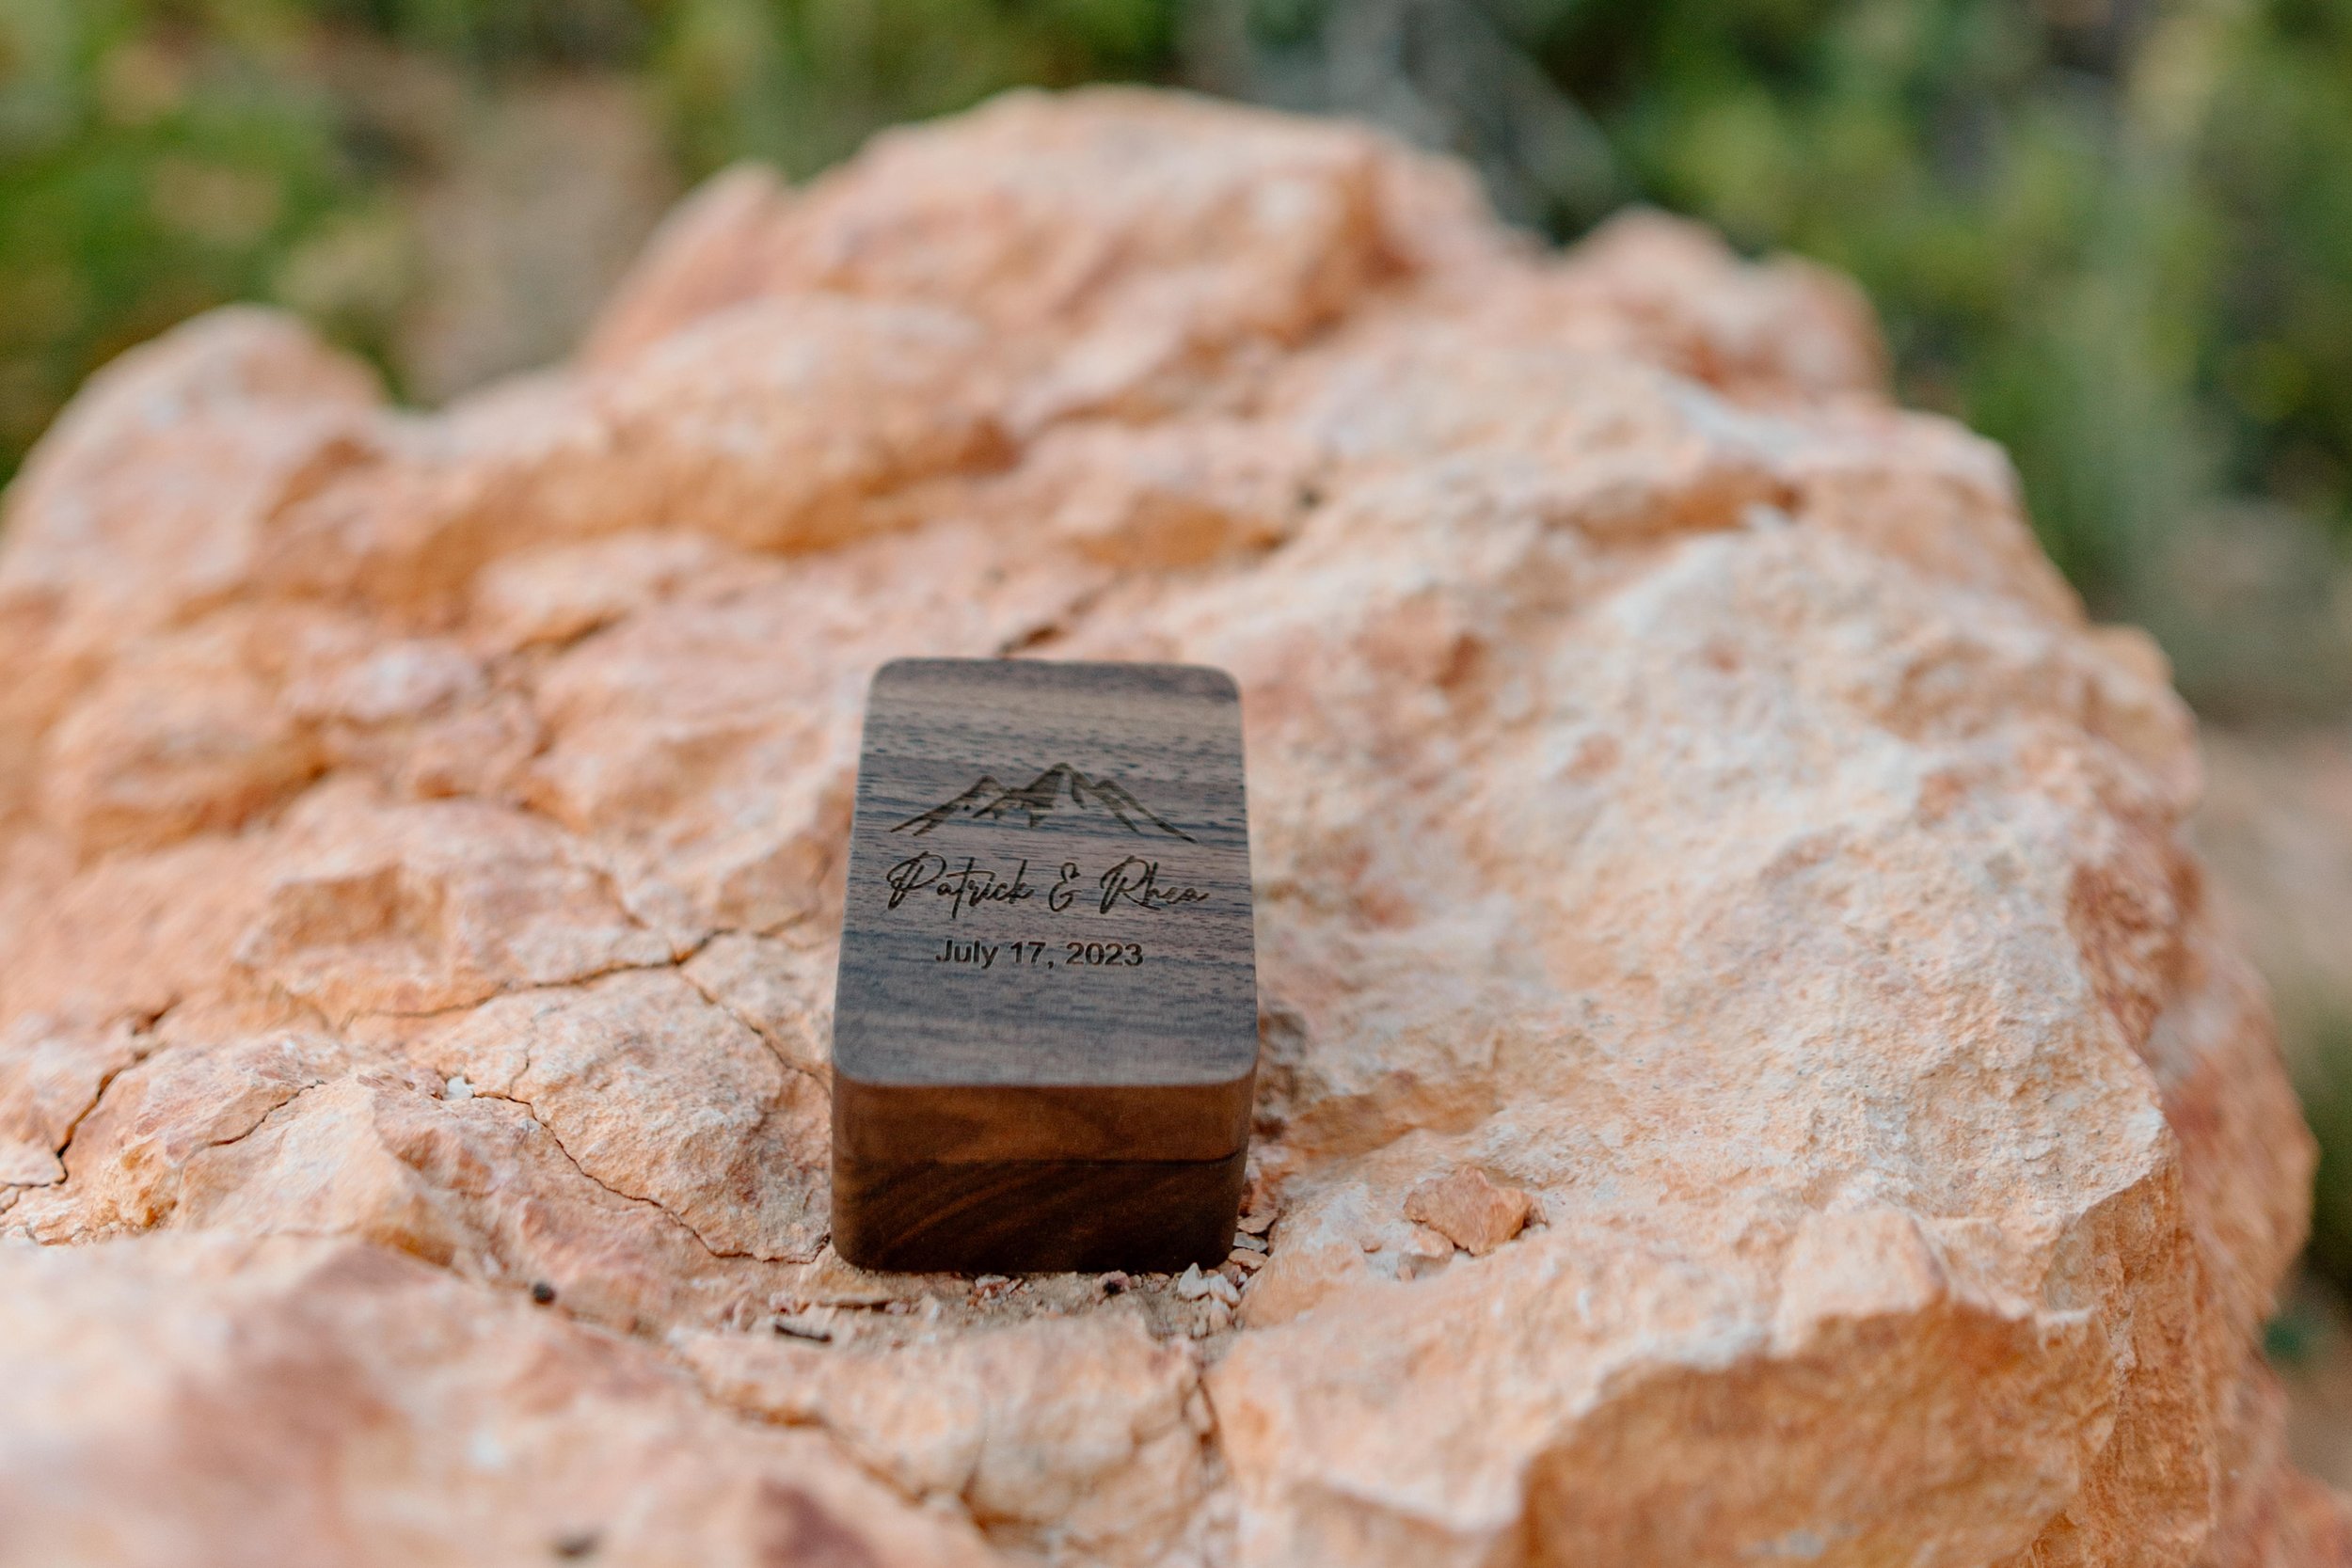  engraved ring box on an orange rock during bryce canyon elopement 